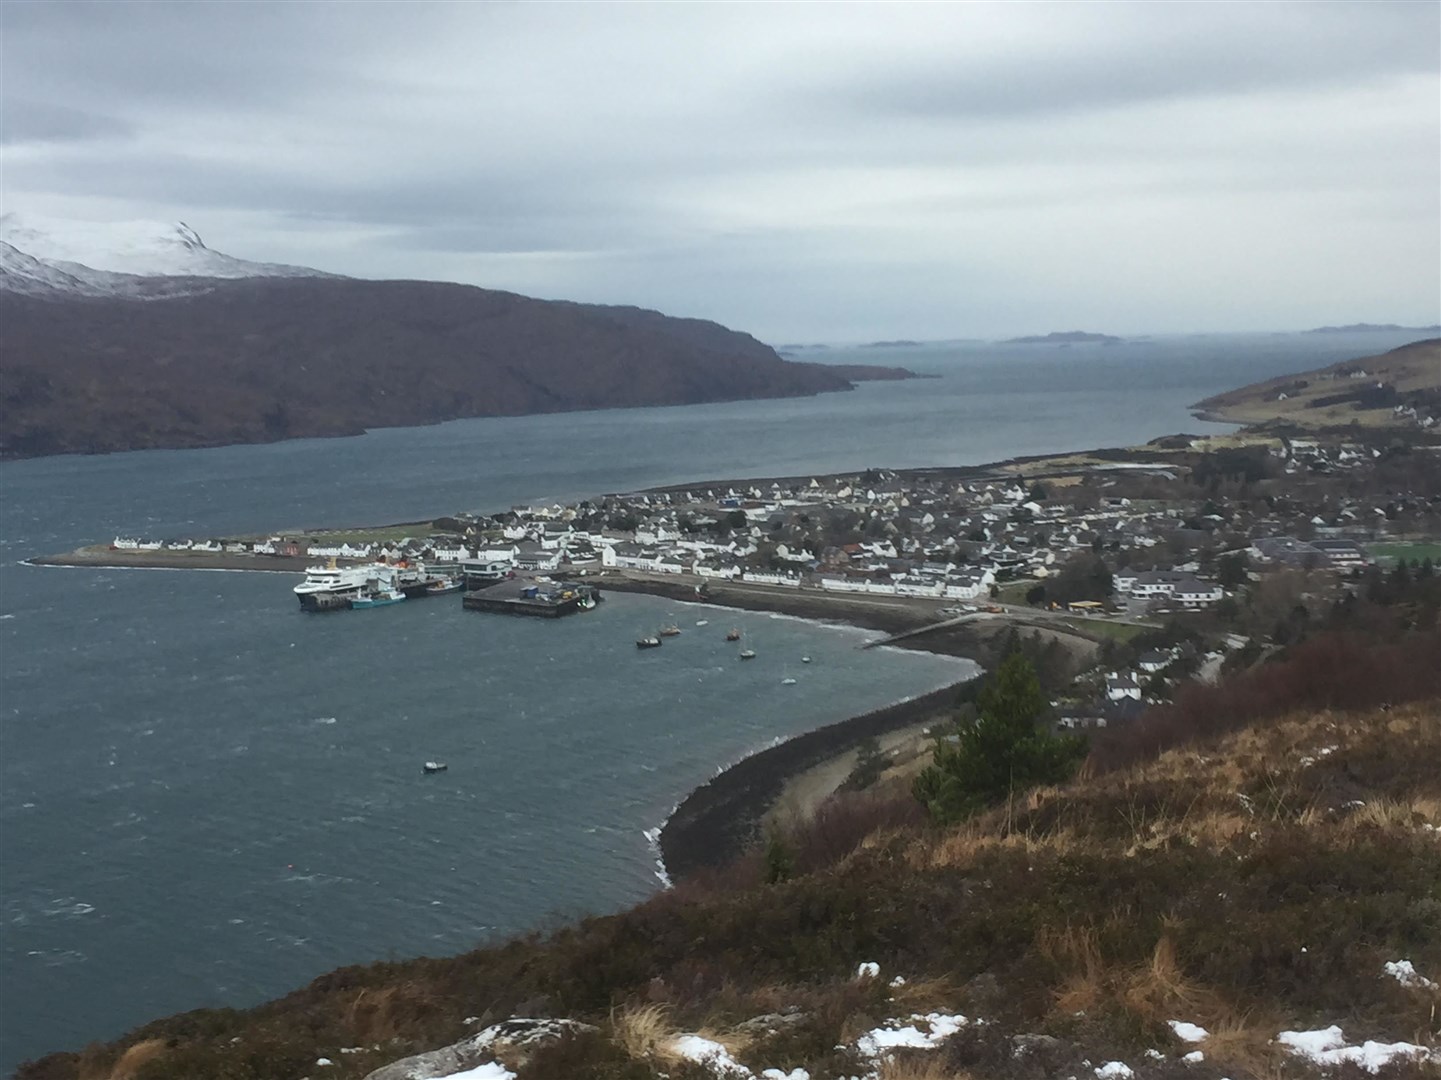 A view from part of the site, looking towards Ullapool.